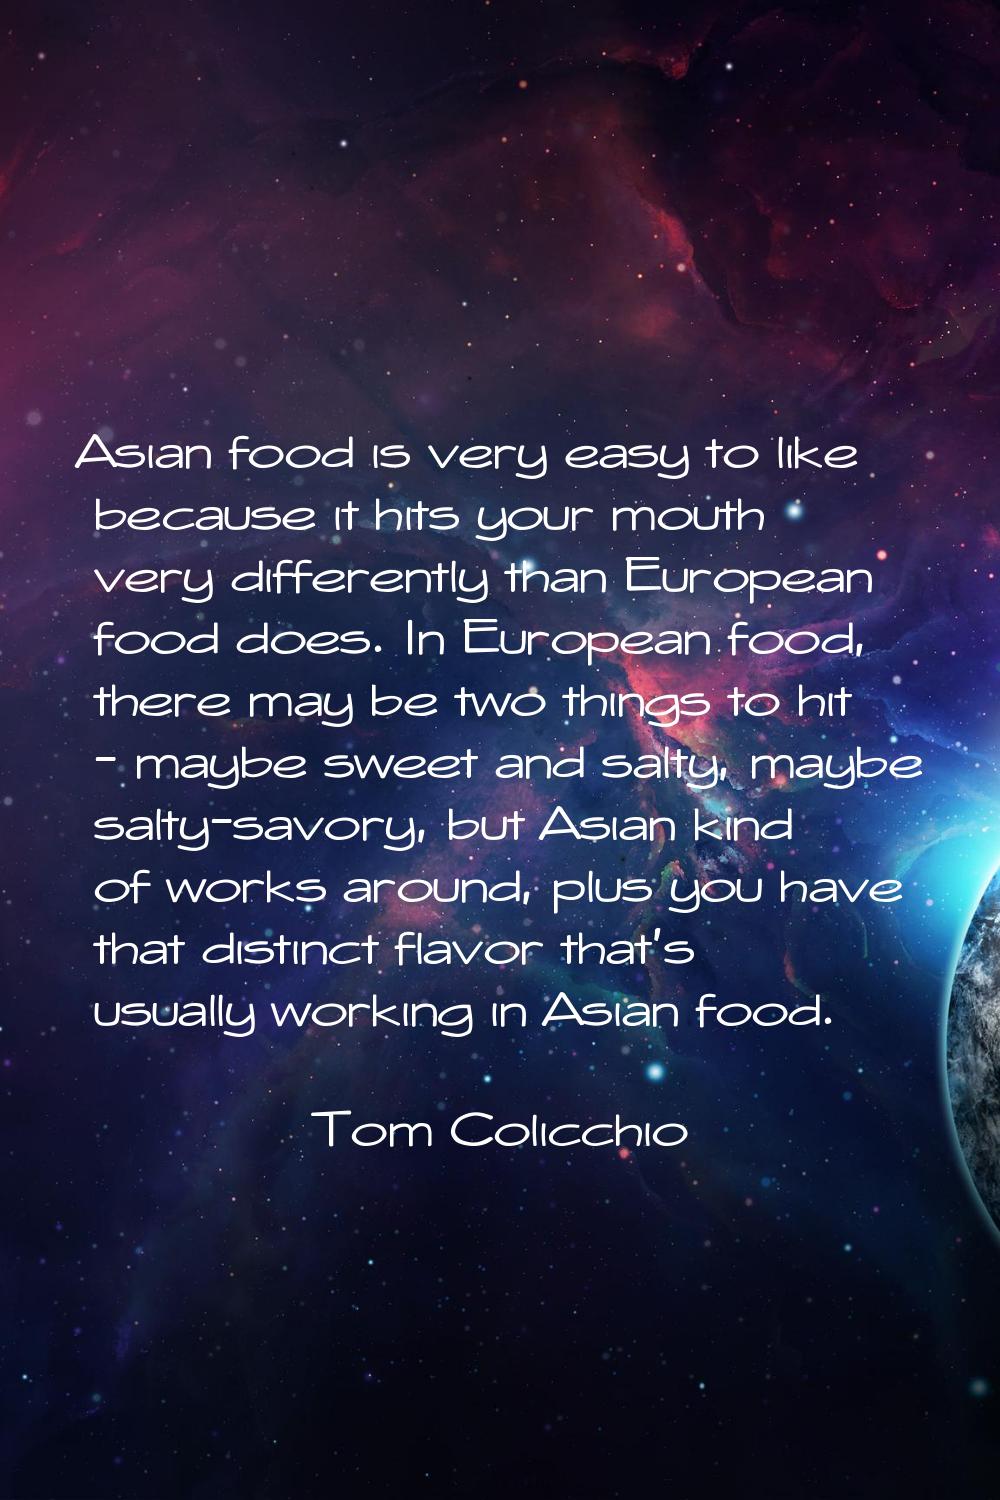 Asian food is very easy to like because it hits your mouth very differently than European food does